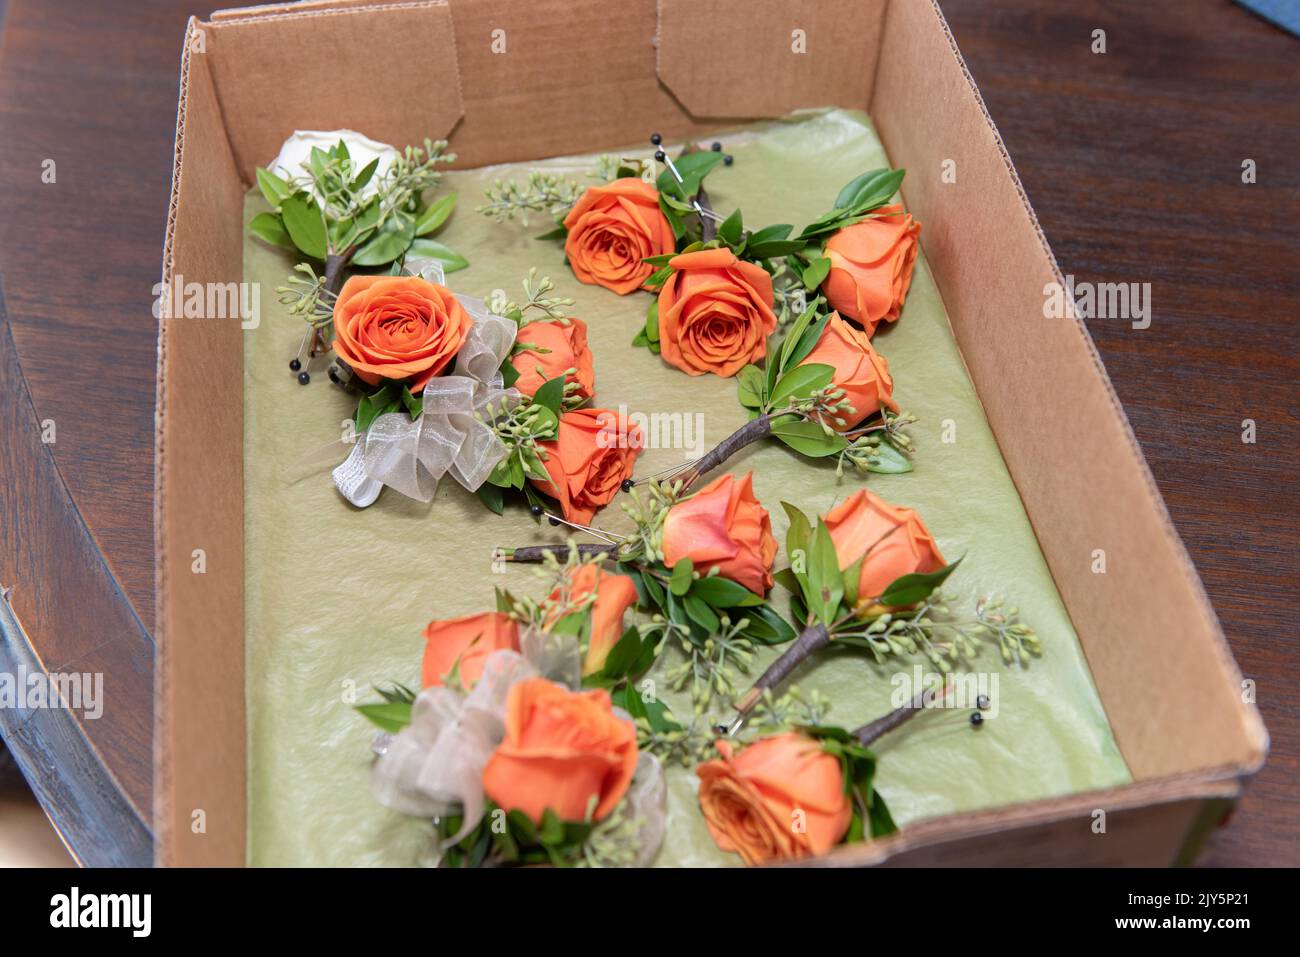 Box of orange rose boutonnieres are ready to be pinned on each member of wedding party. Stock Photo